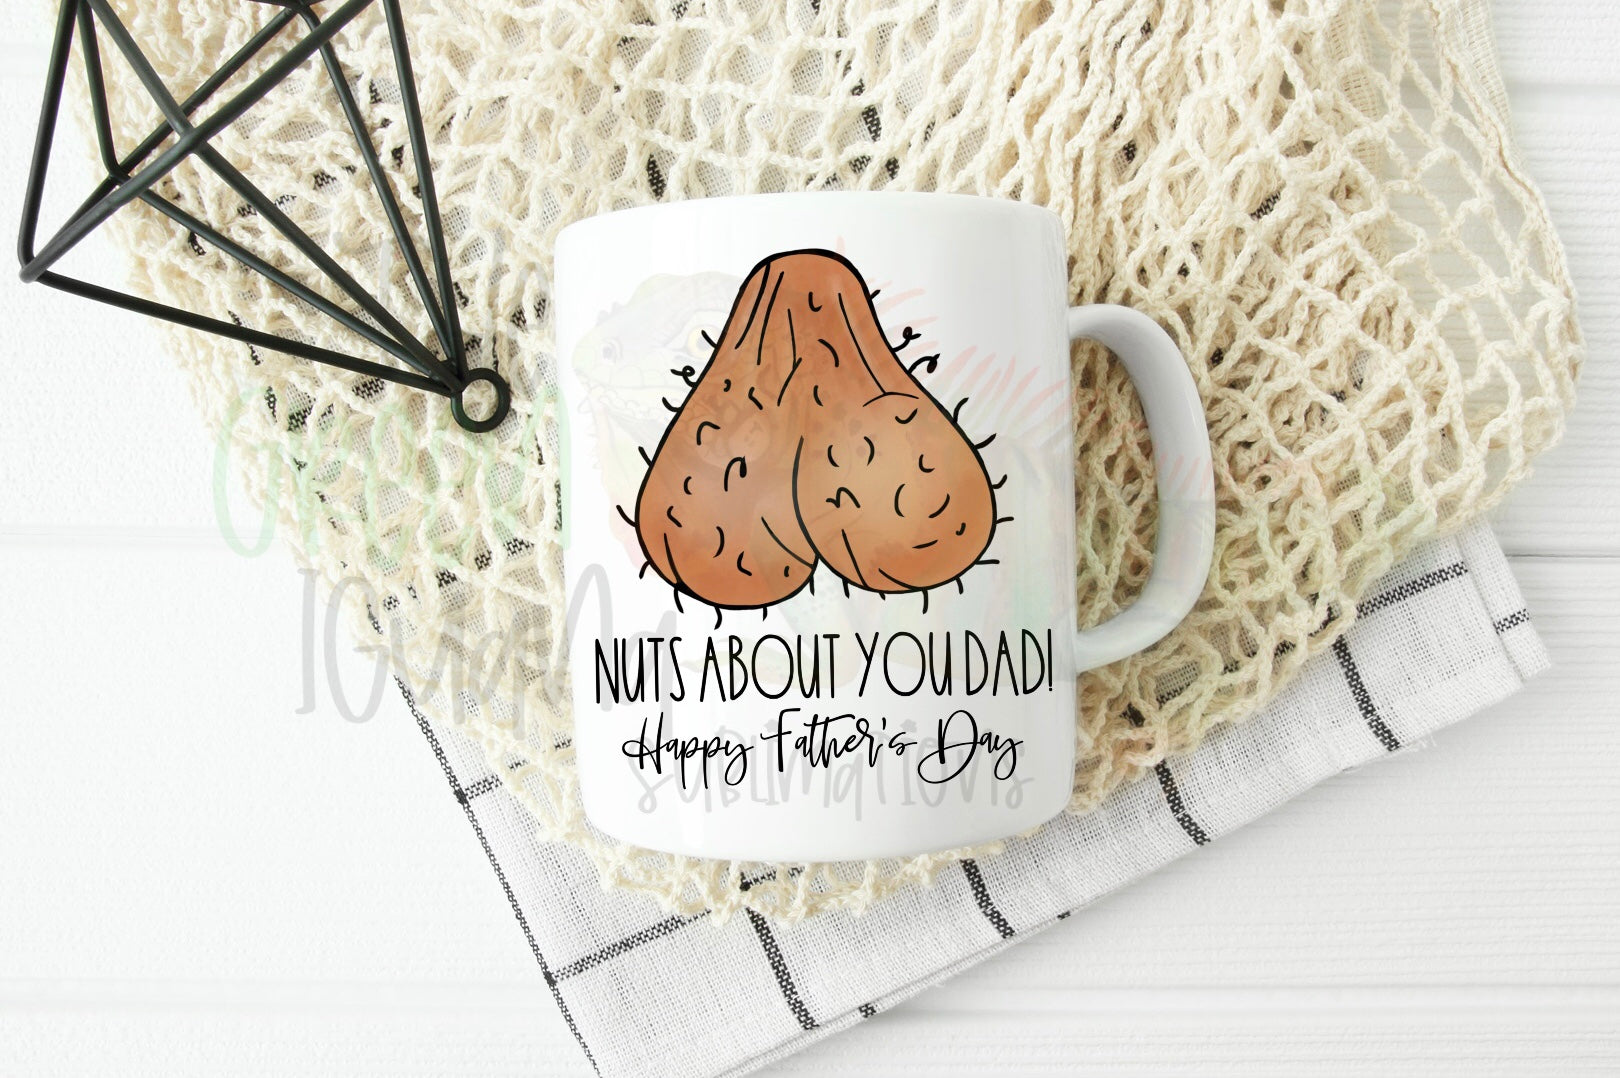 Nuts about you dad! Happy Father’s Day